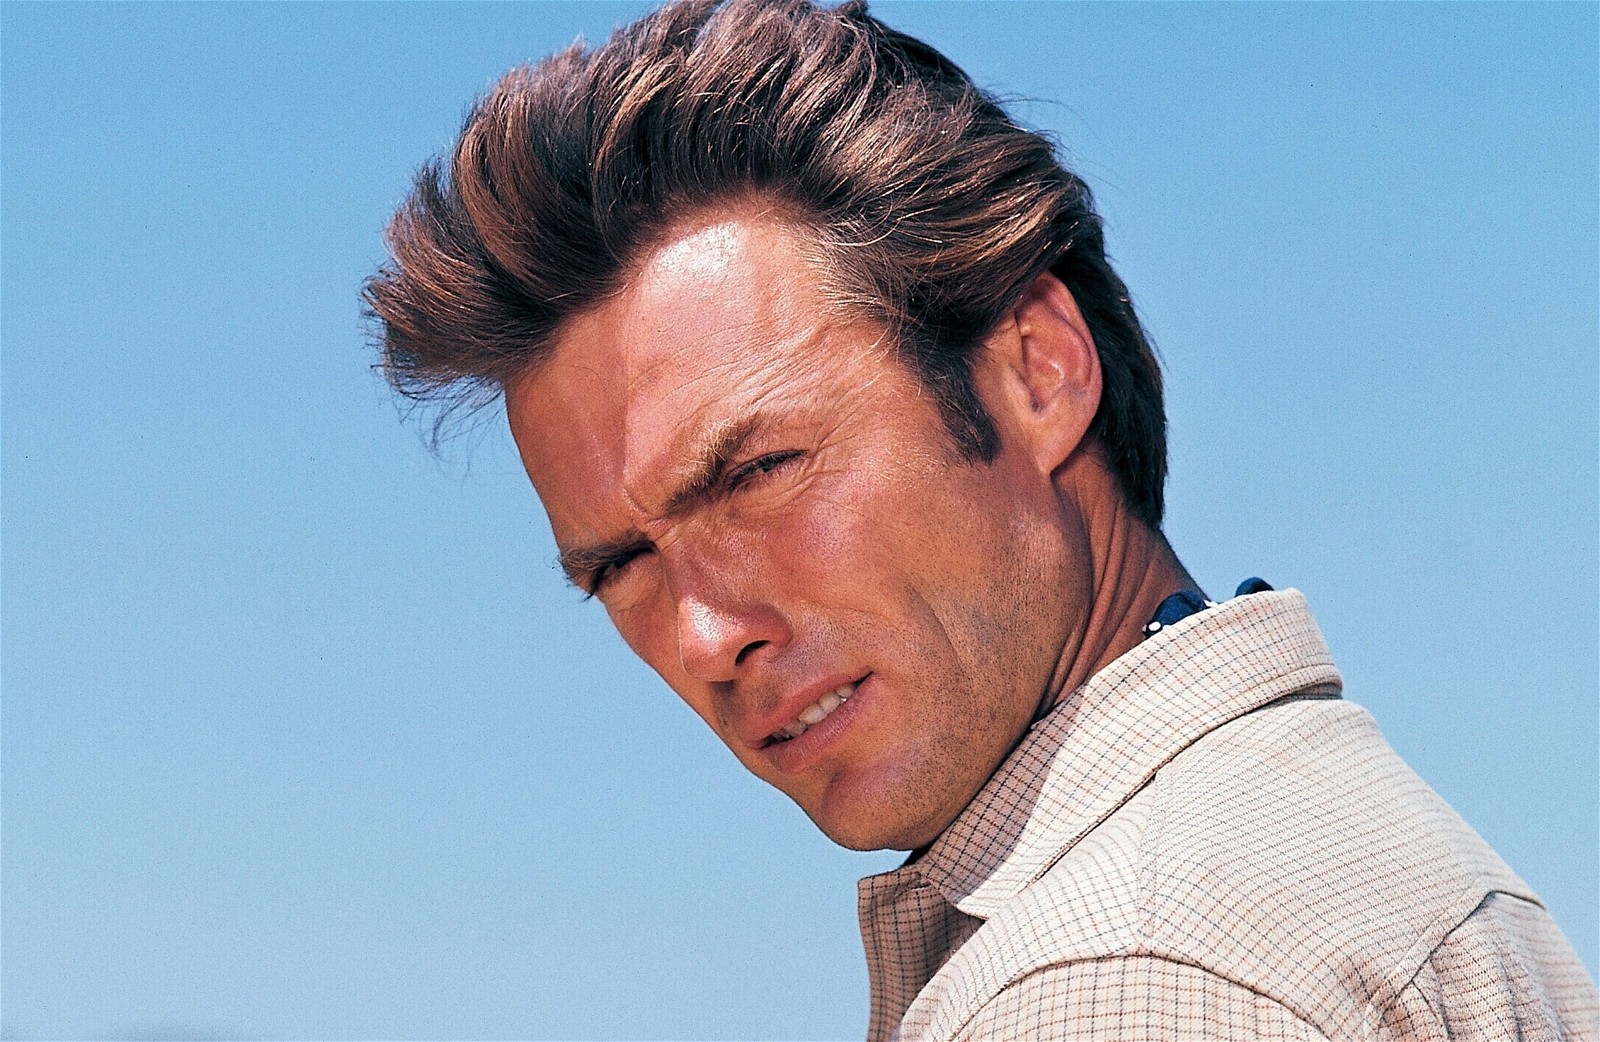 Clint Eastwood has been in numerous affairs throughout his life